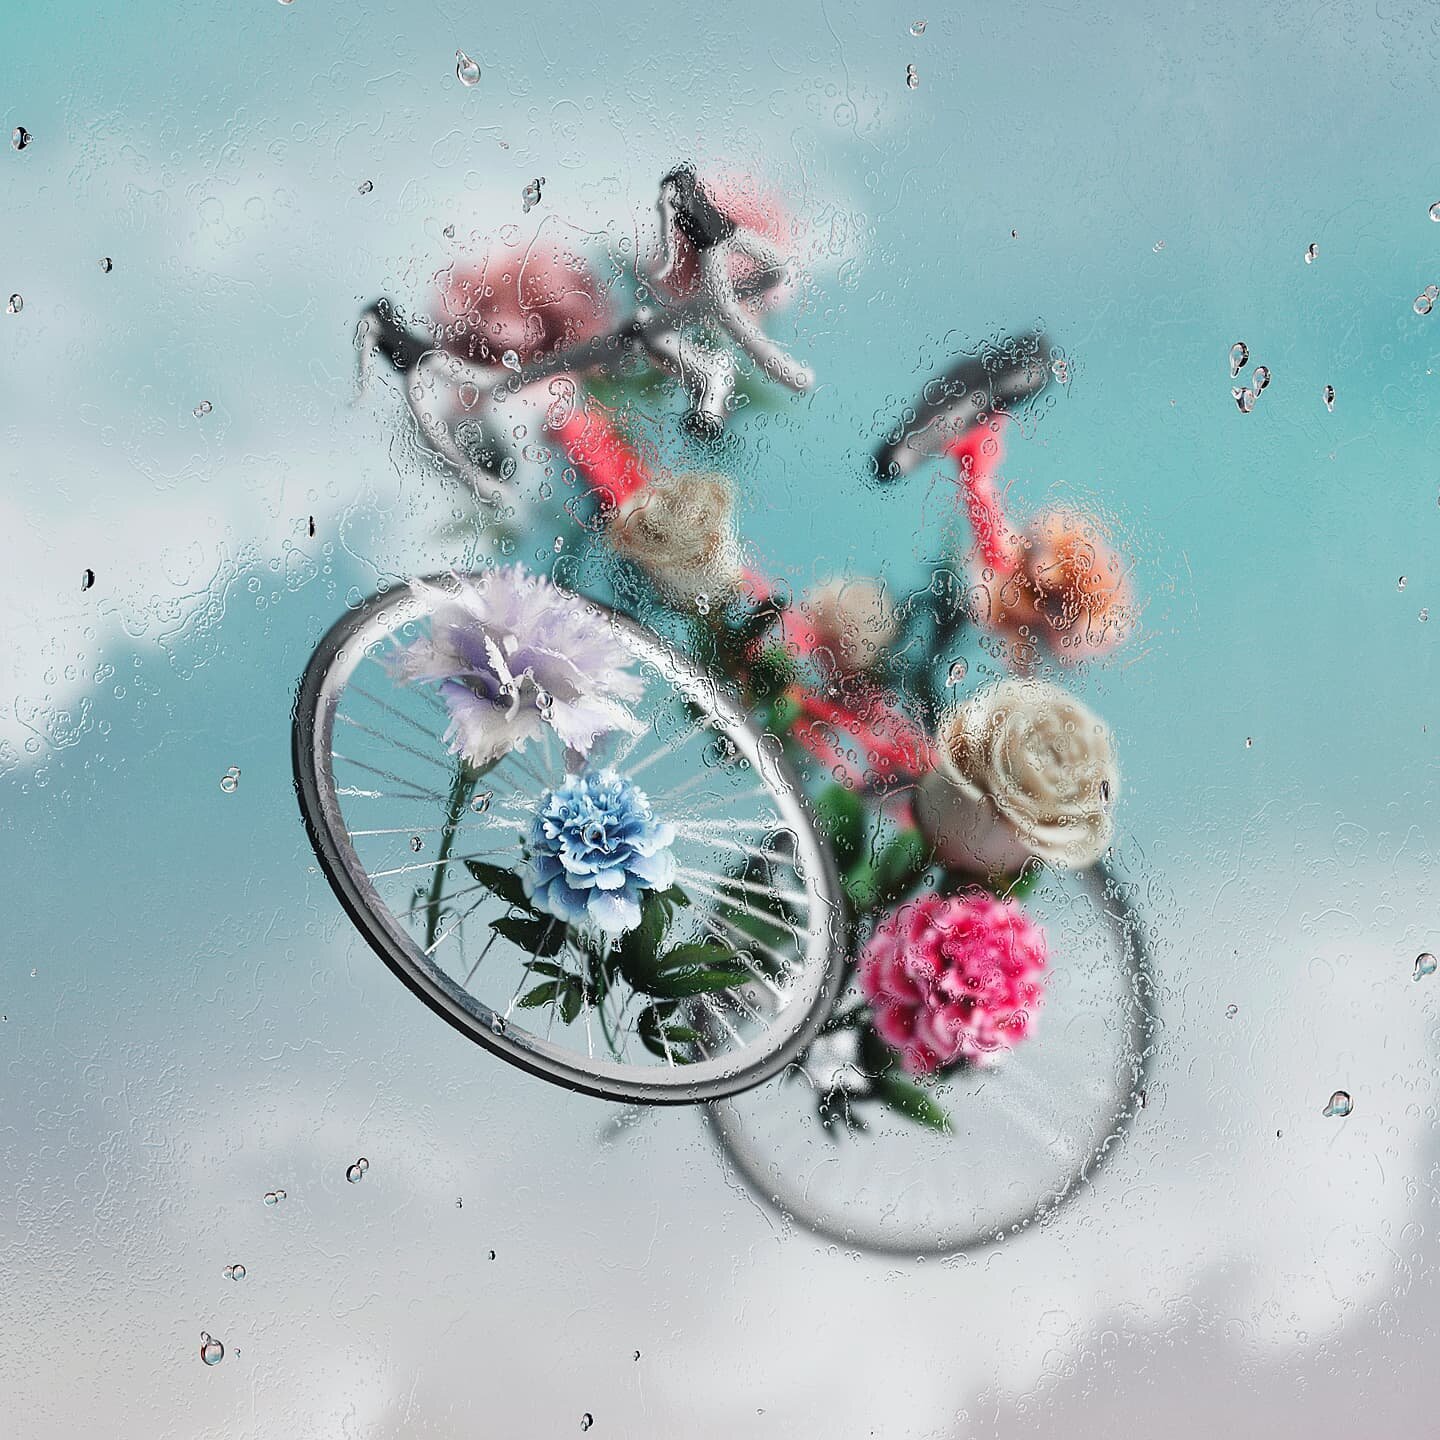 🚴From little things big things grow
-
-
#3d #3D #3dart #abstract #Abstract #alberto #alberto_carbonell #3dartwork #carbonell #cgart #cgi #color #design #interior #landscape #nature #oniric #organic #rare #redshift #render #sky #space #surreal #surre